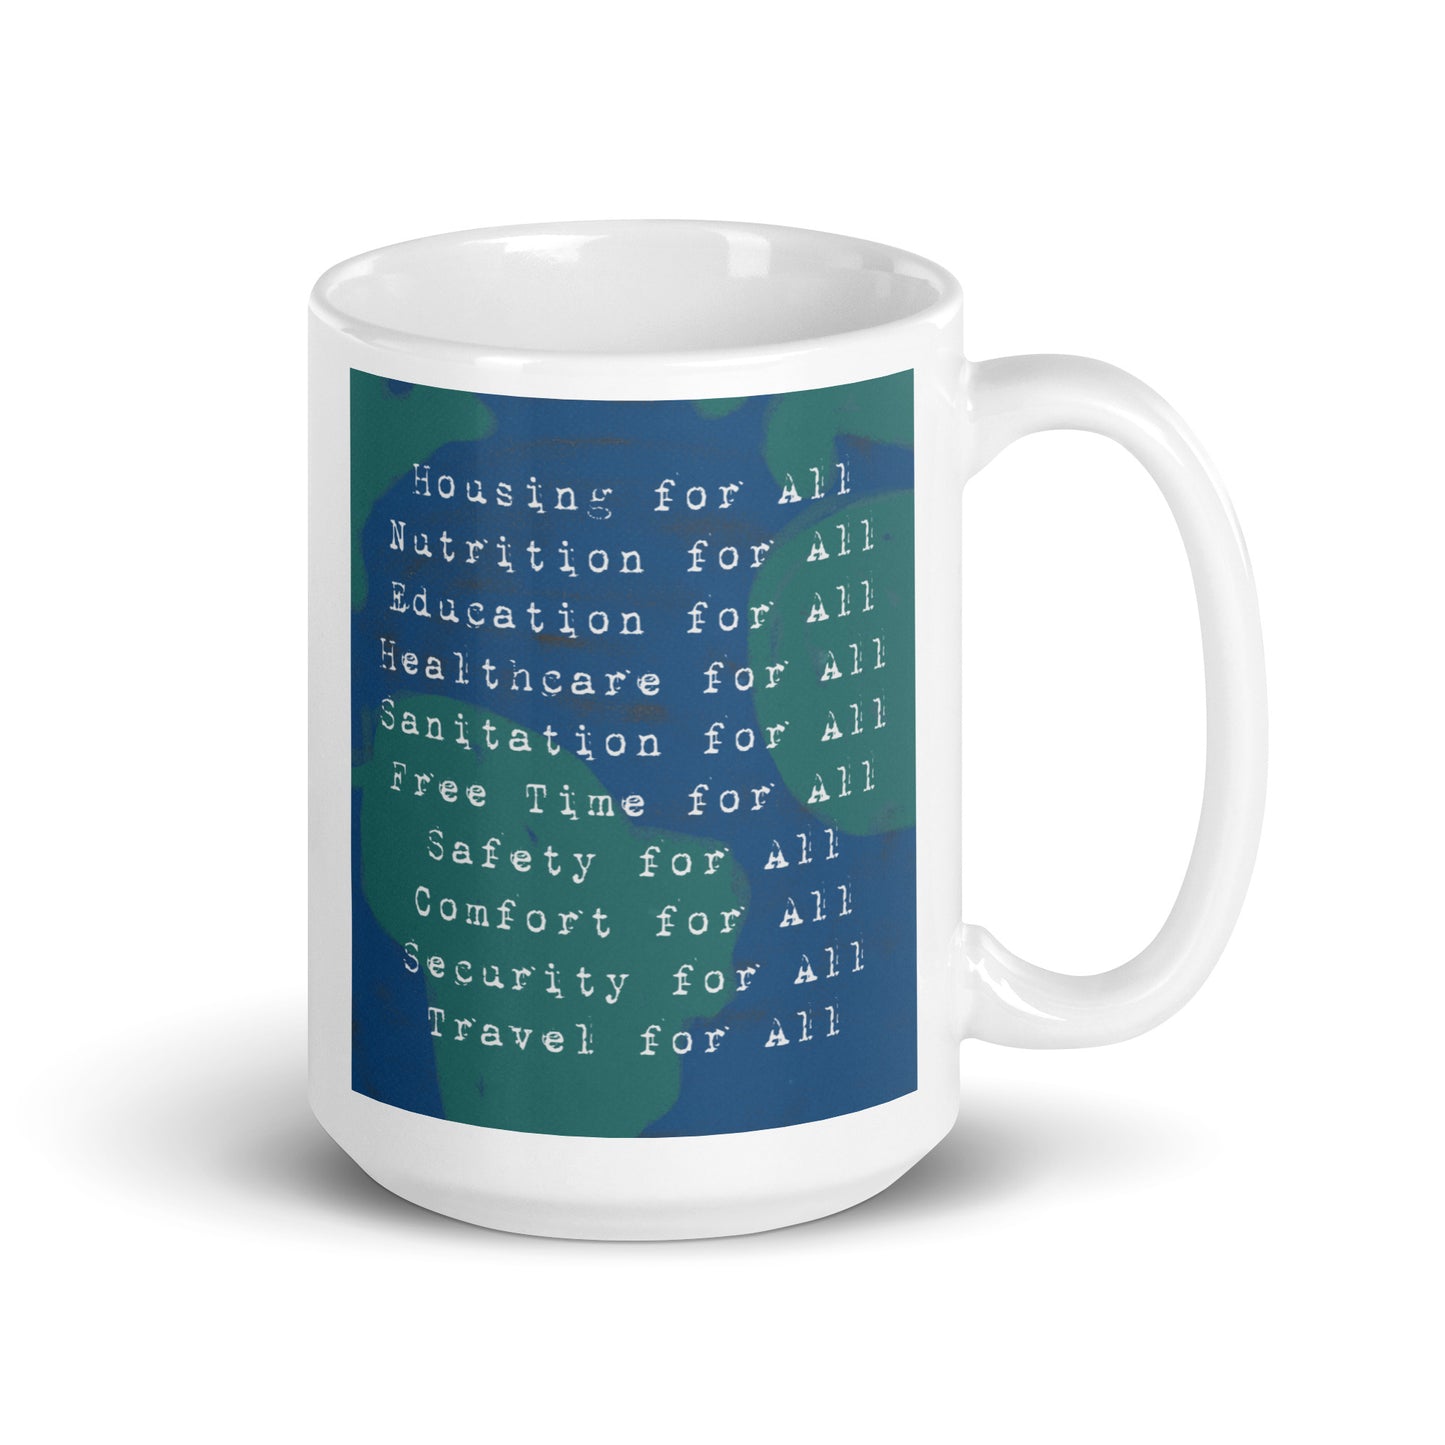 Rights for All - White glossy mug